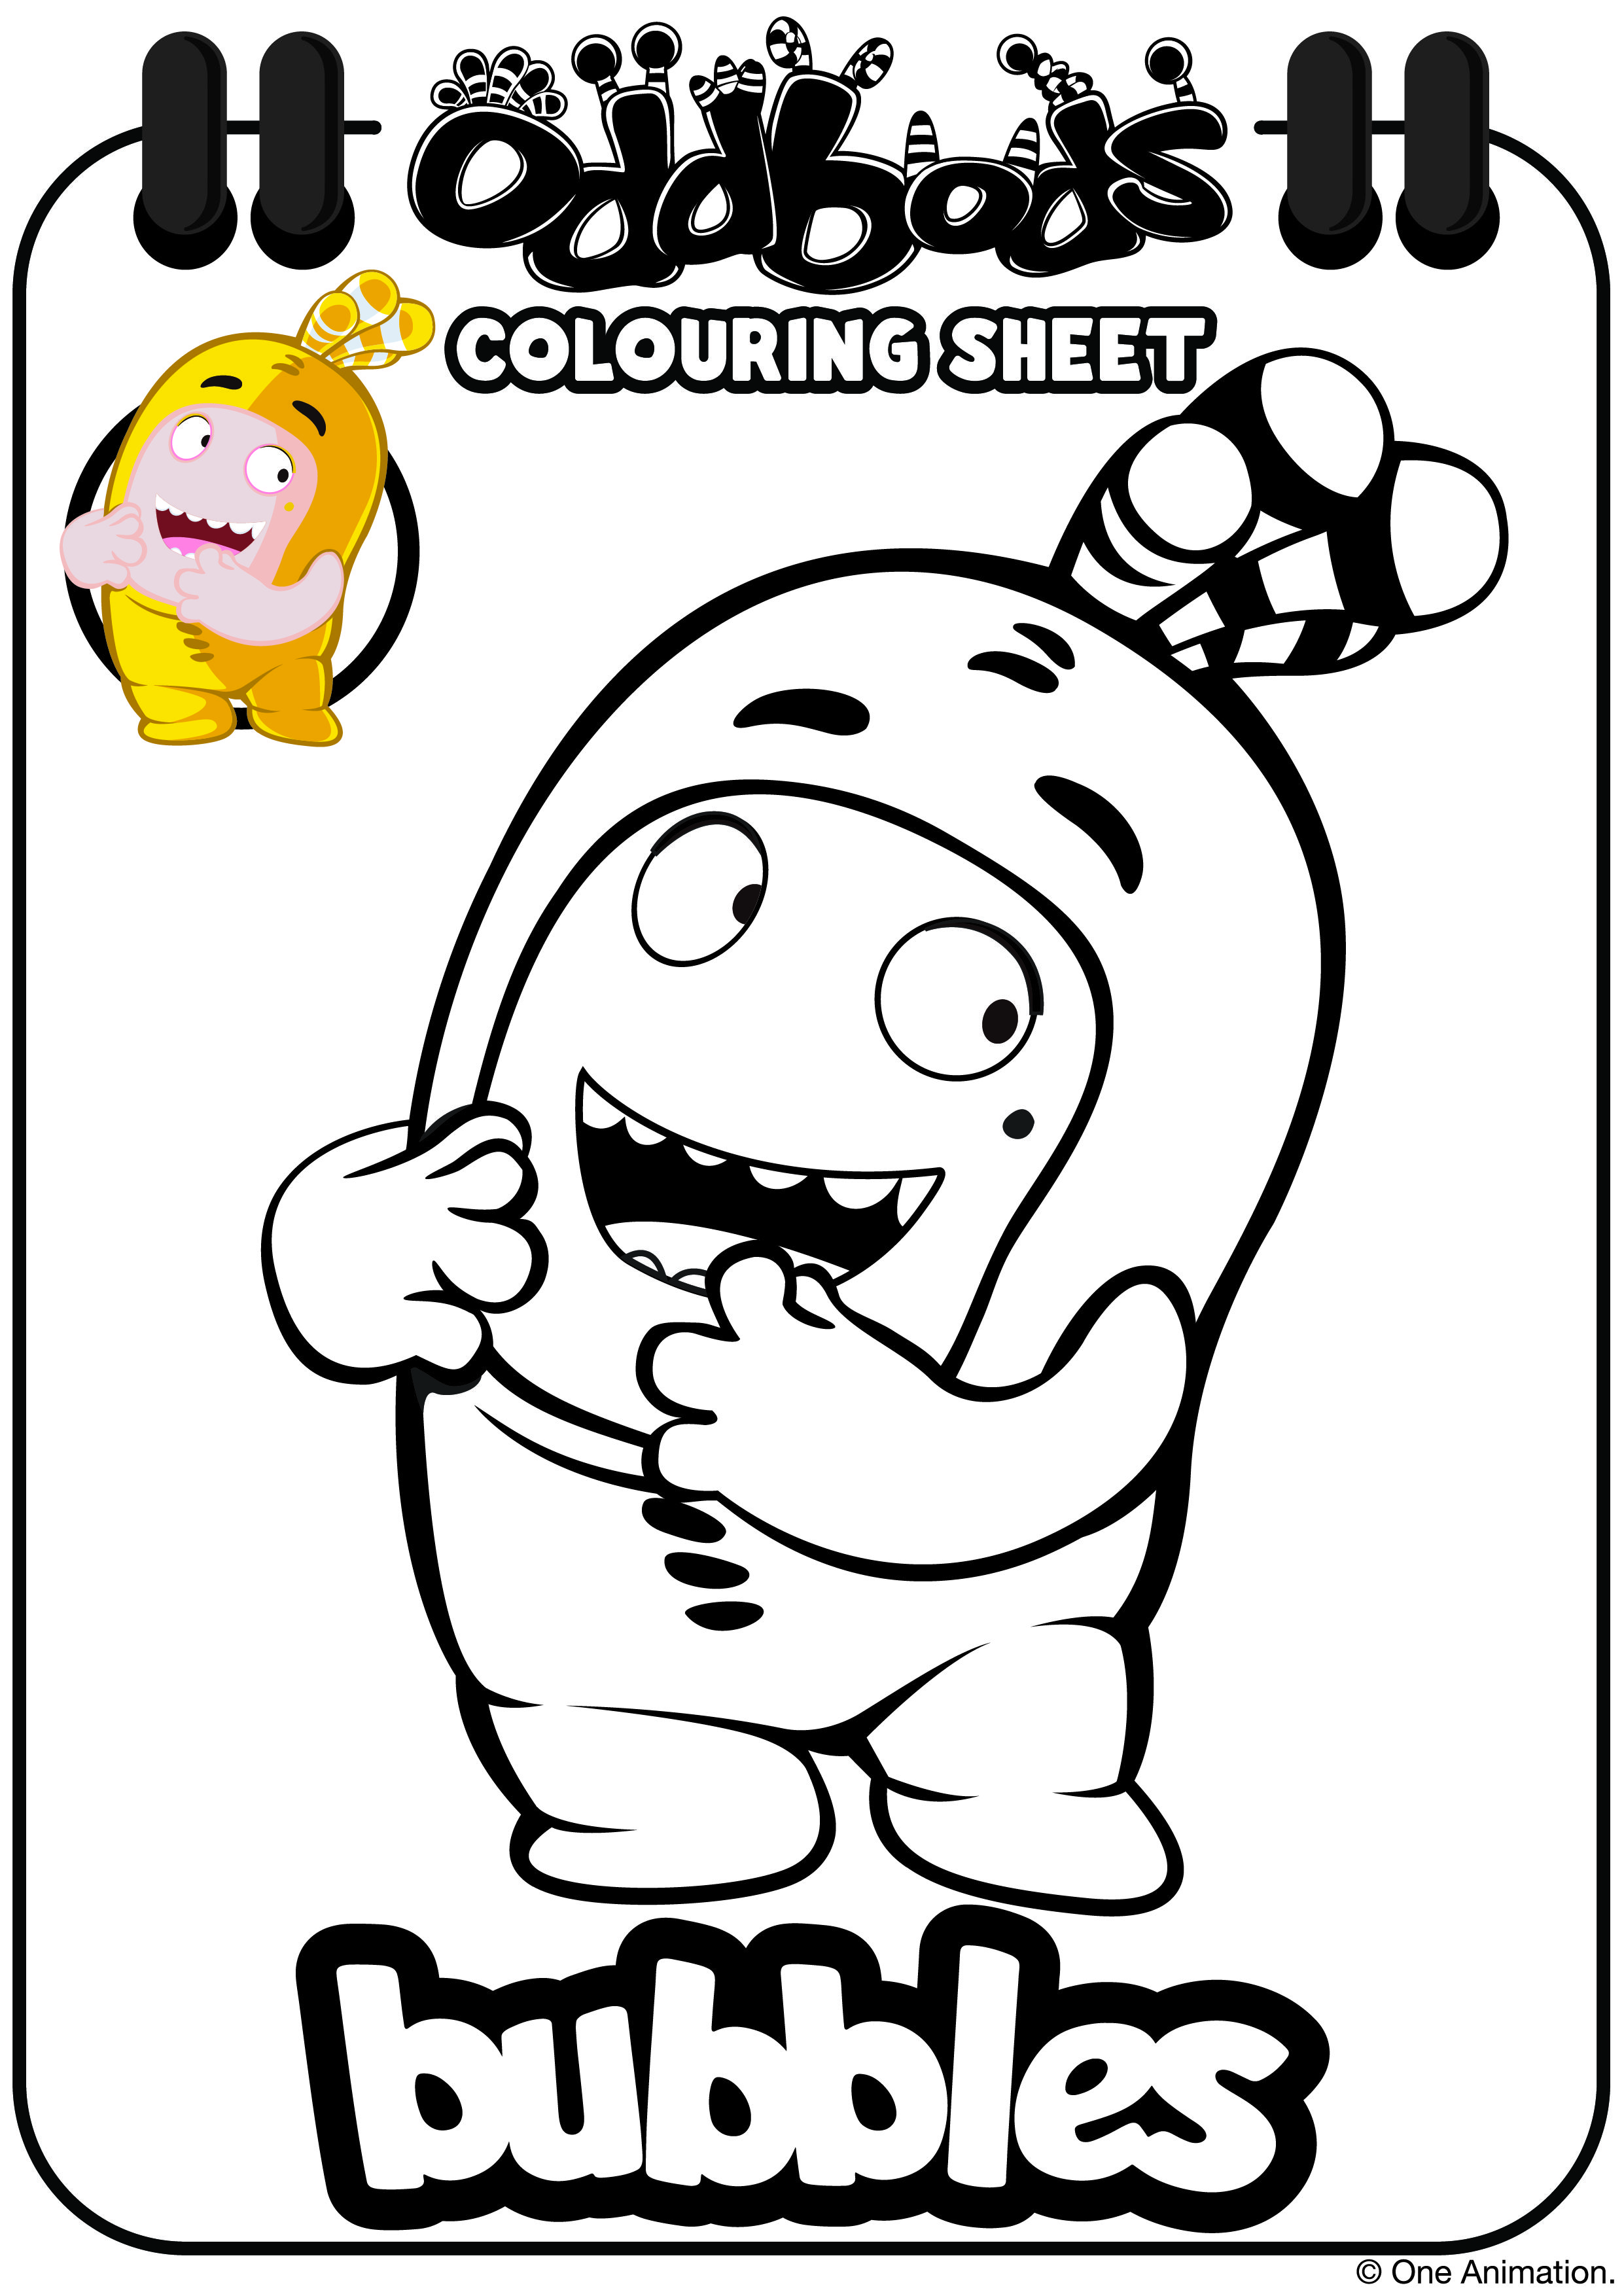 Printables | Coloring pages for kids, Shark craft, Holiday words